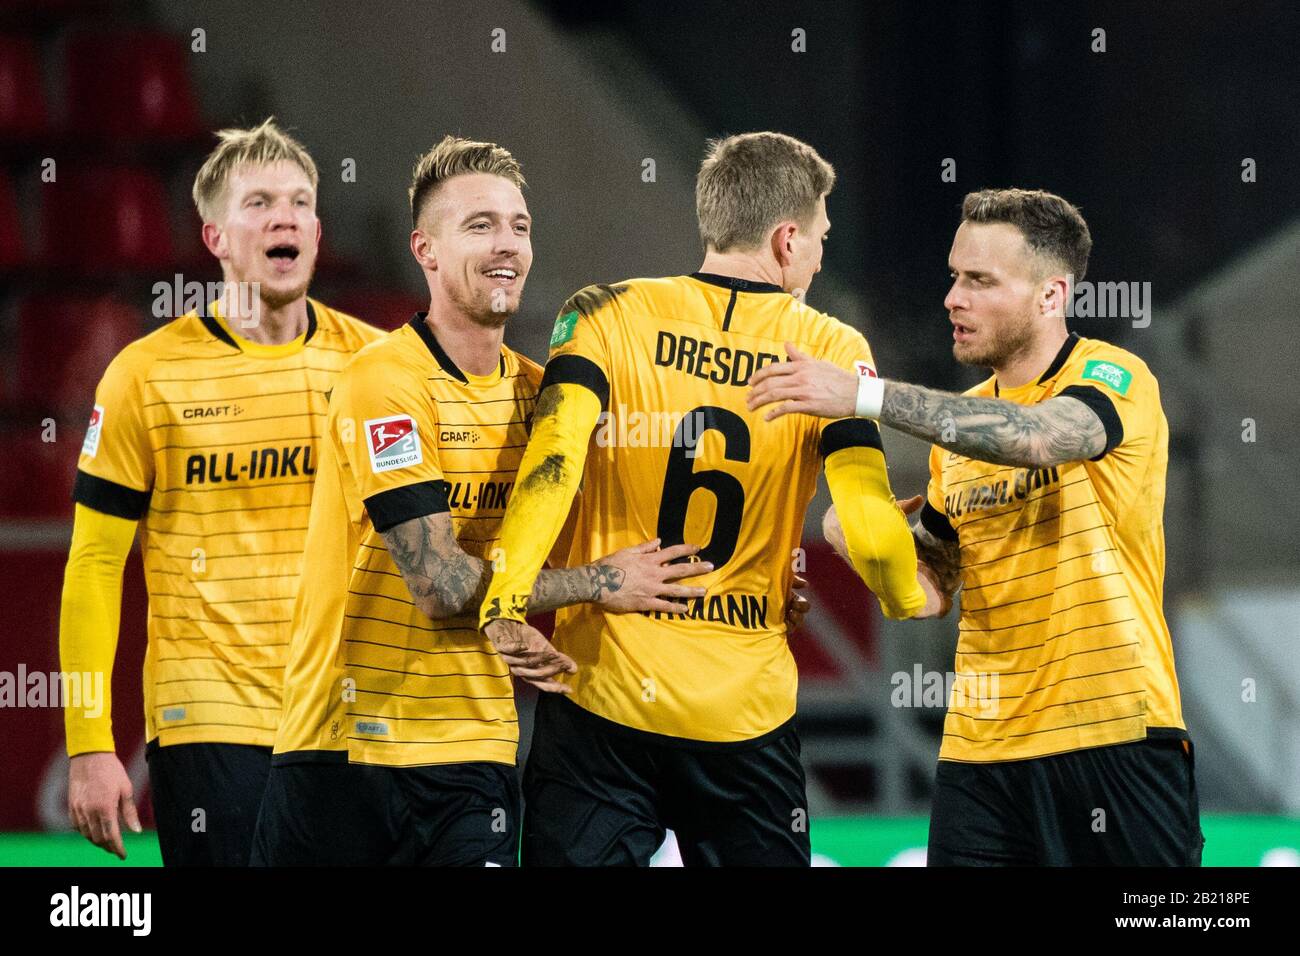 28 February 2020, Bavaria, Regensburg: Football: 2nd Bundesliga, Jahn Regensburg - Dynamo Dresden, 24th matchday in the Continental Arena. Simon Makienok Christoffersen (l-r), Ondrej Petrak, Marco Hartmann and Patrick Schmidt from Dynamo Dresden cheer for their victory after the final whistle. Photo: Matthias Balk/dpa - IMPORTANT NOTE: In accordance with the regulations of the DFL Deutsche Fußball Liga and the DFB Deutscher Fußball-Bund, it is prohibited to exploit or have exploited in the stadium and/or from the game taken photographs in the form of sequence images and/or video-like photo ser Stock Photo